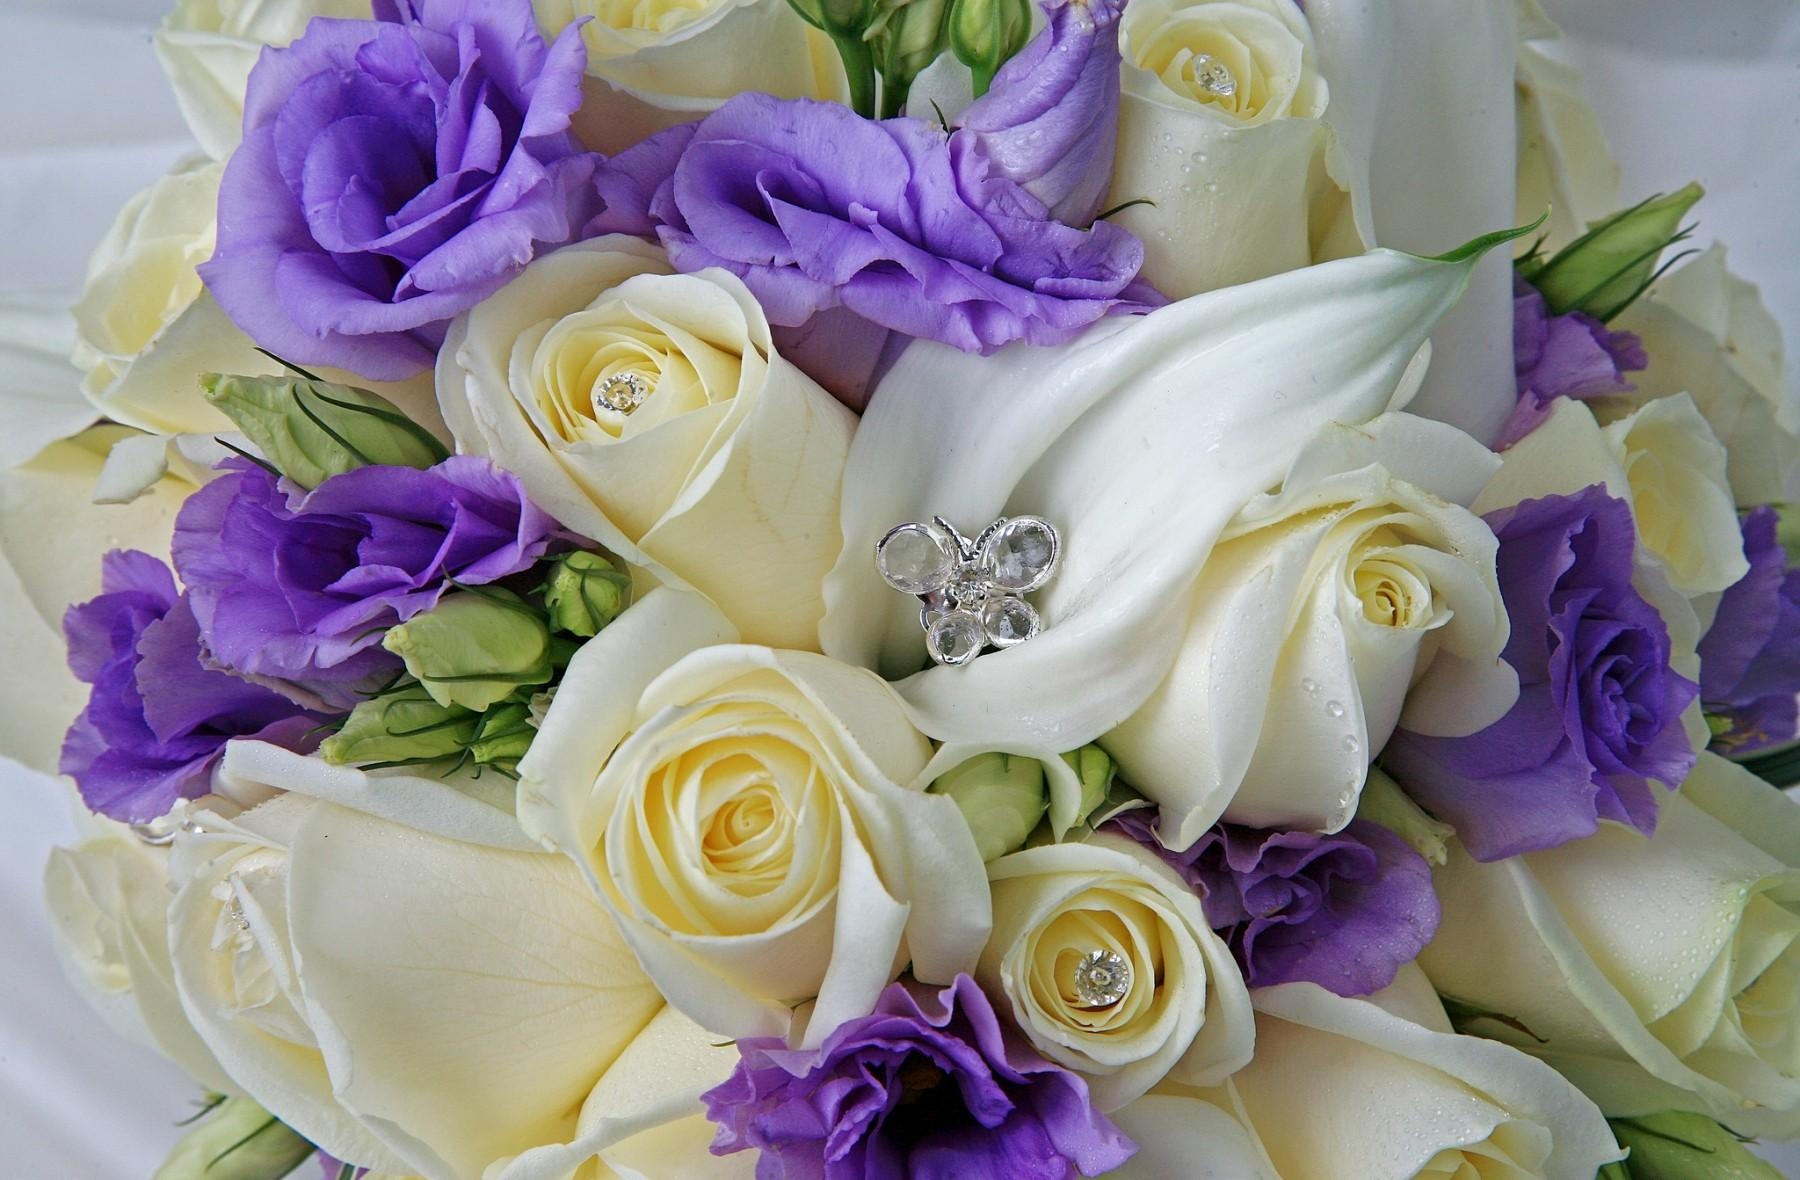 drops, decorations, bouquet, lisianthus russell, roses, lisiantus russell, flowers High Definition image